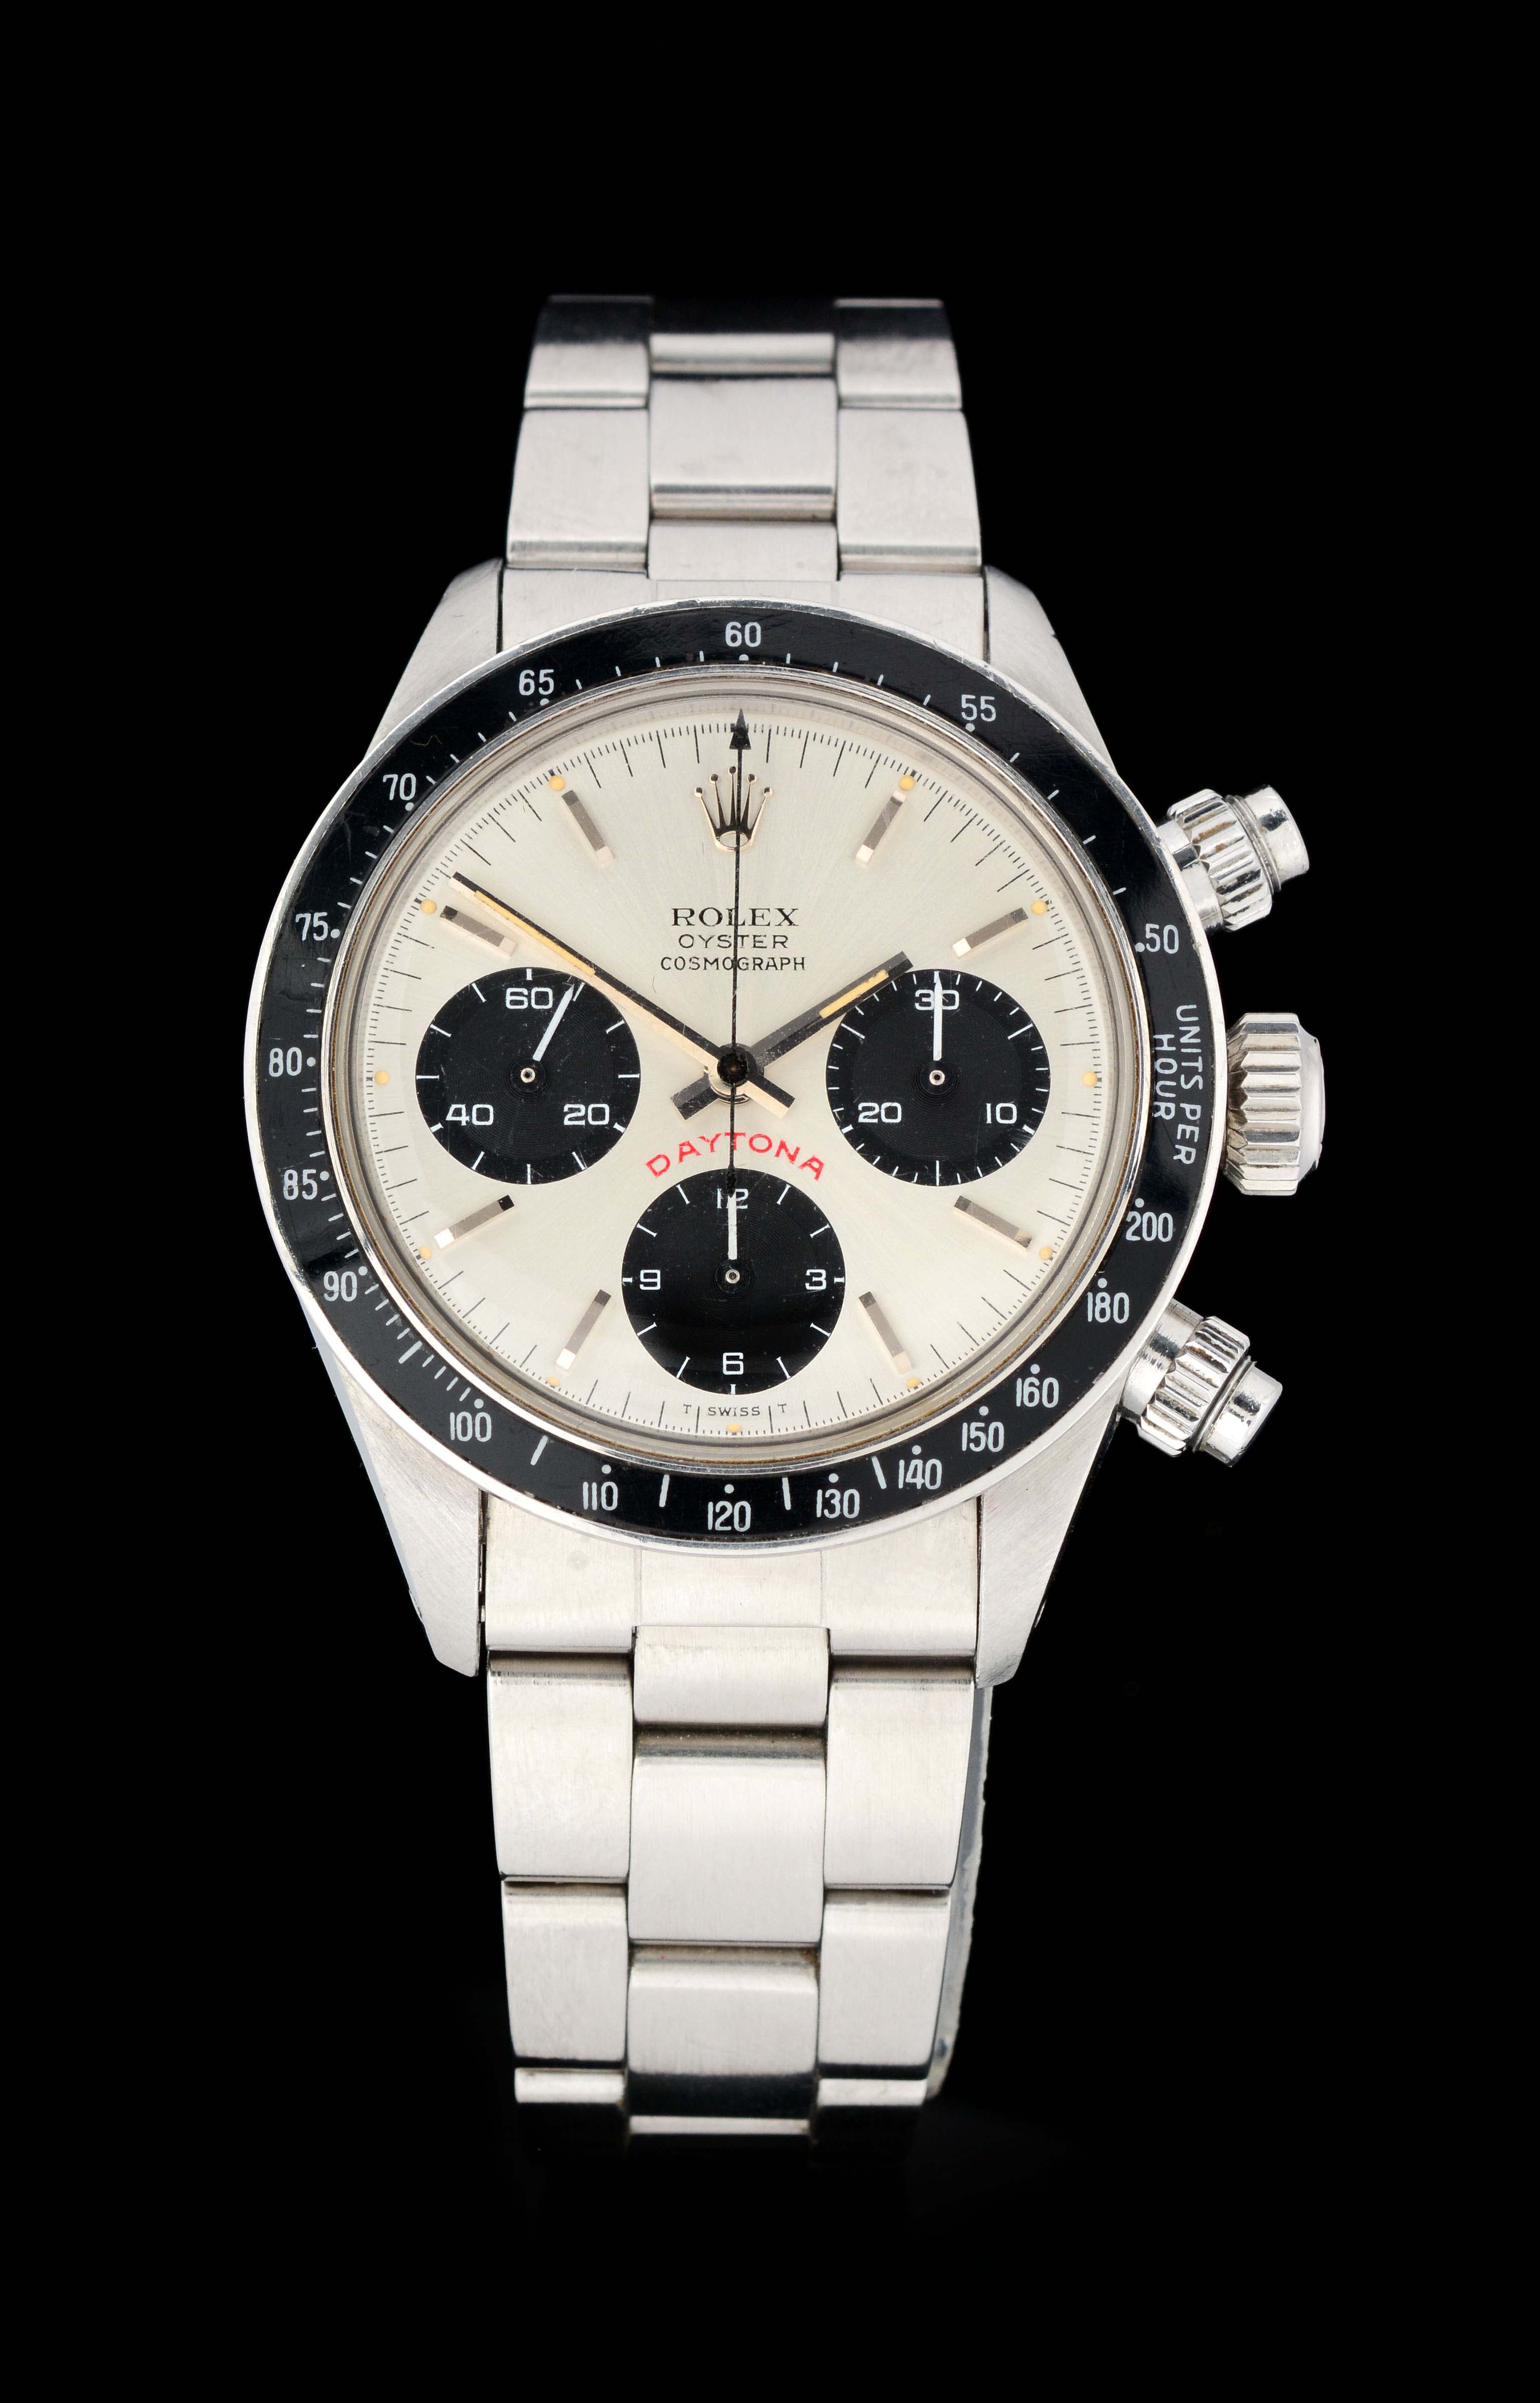 Rolex Oyster Cosmograph Daytona Wristwatch Model # 6263, estimated at $50,000-80,000.